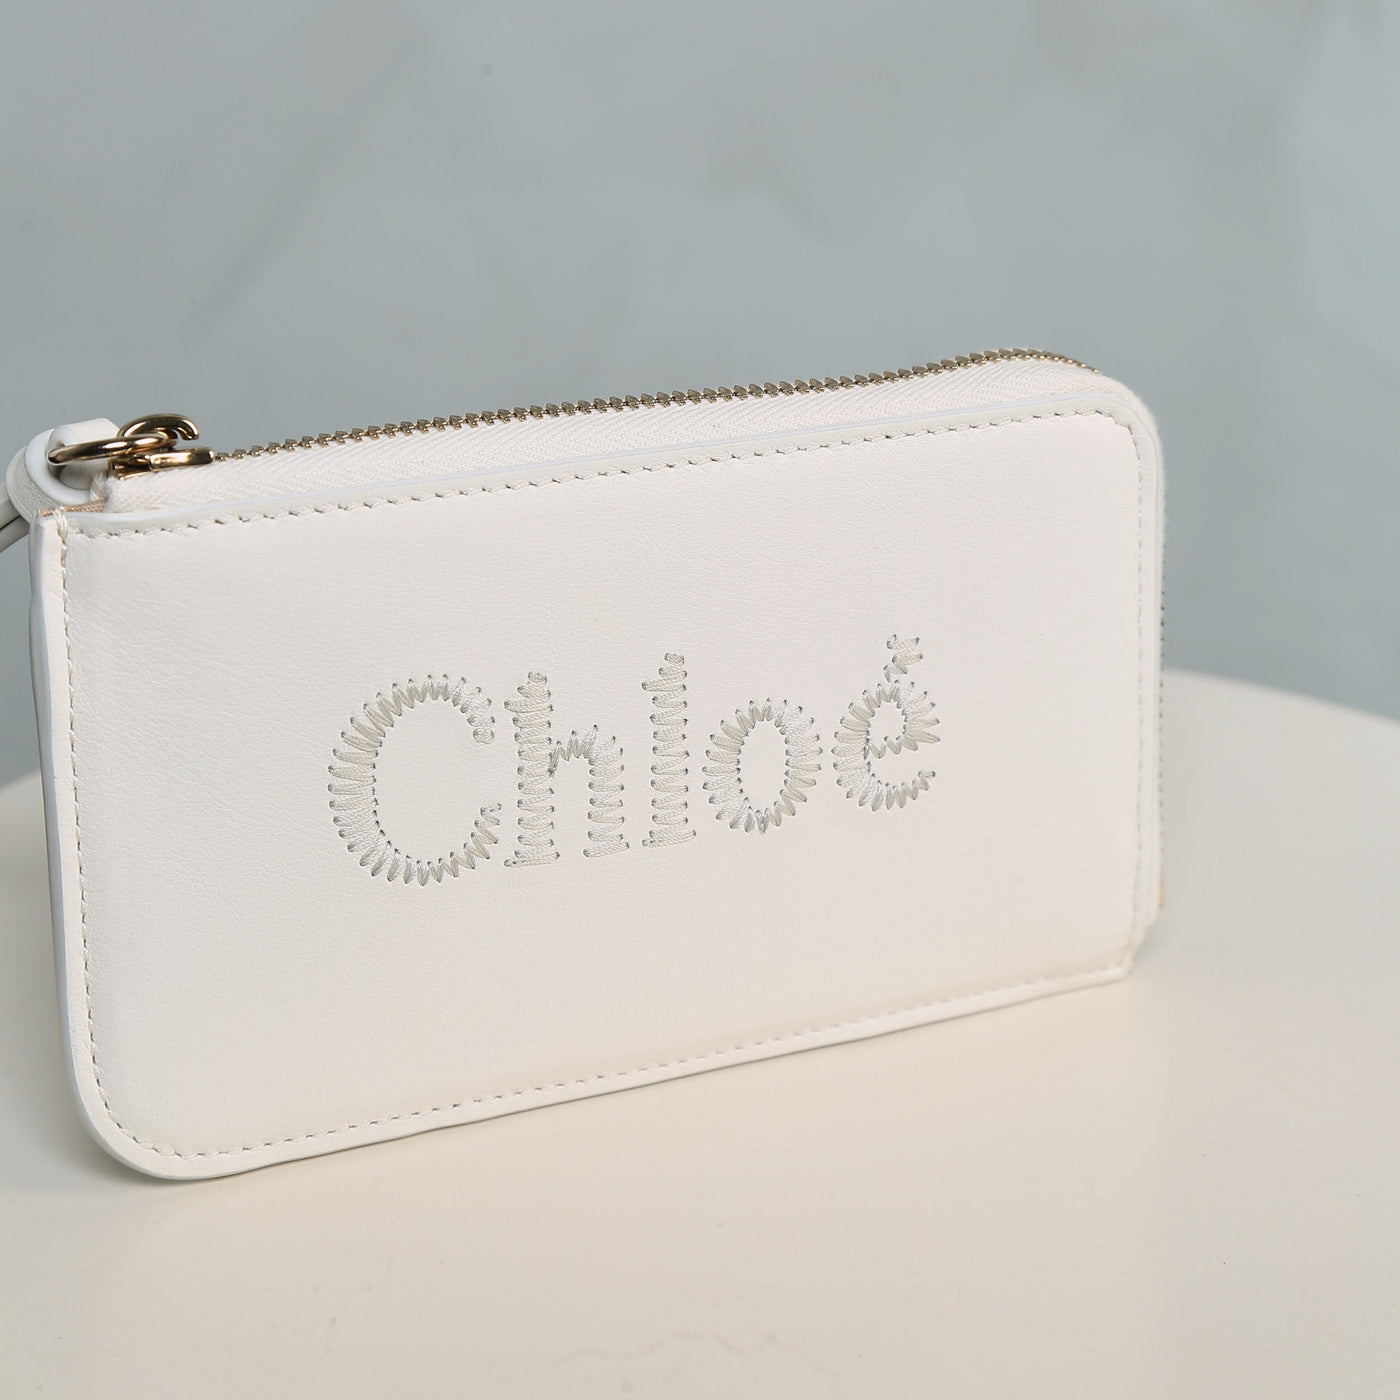 White CHLOÉ Sense Coin Purse With Chloé Logo Embroidered On The Front